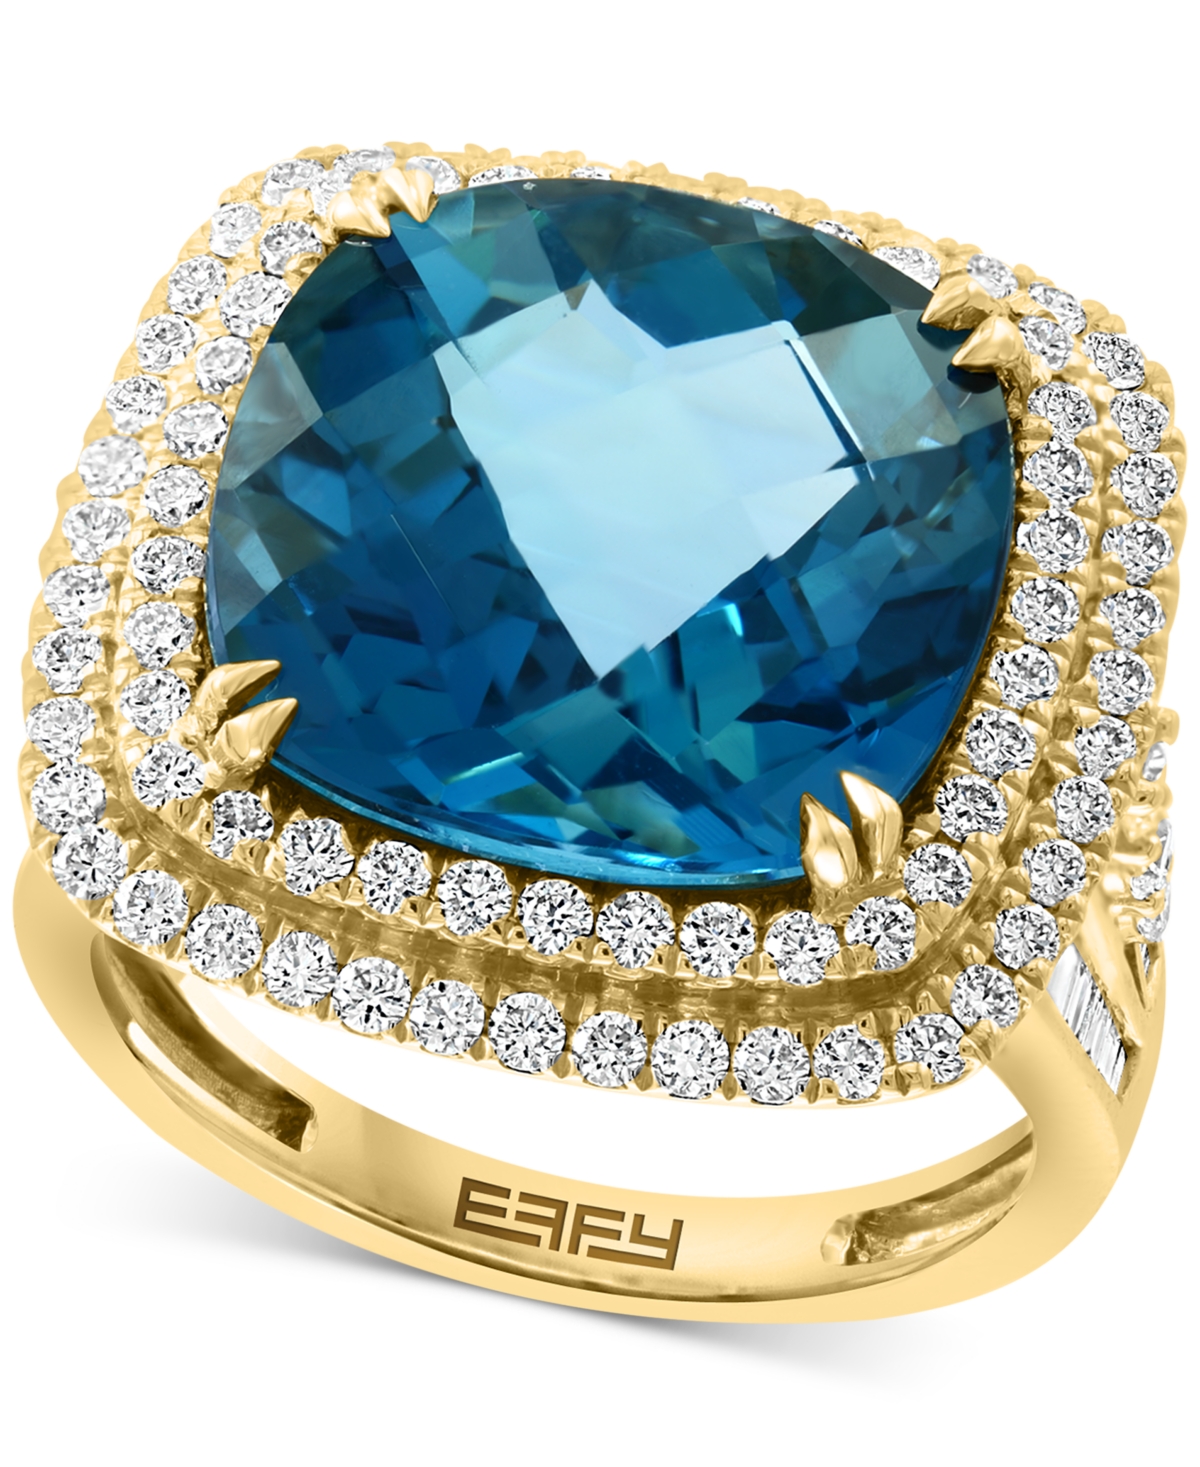 EFFY COLLECTION EFFY LONDON BLUE TOPAZ (12-1/3 CT. T.W.) & DIAMOND (1-1/5 CT. T.W.) DOUBLE HALO RING IN 14K GOLD